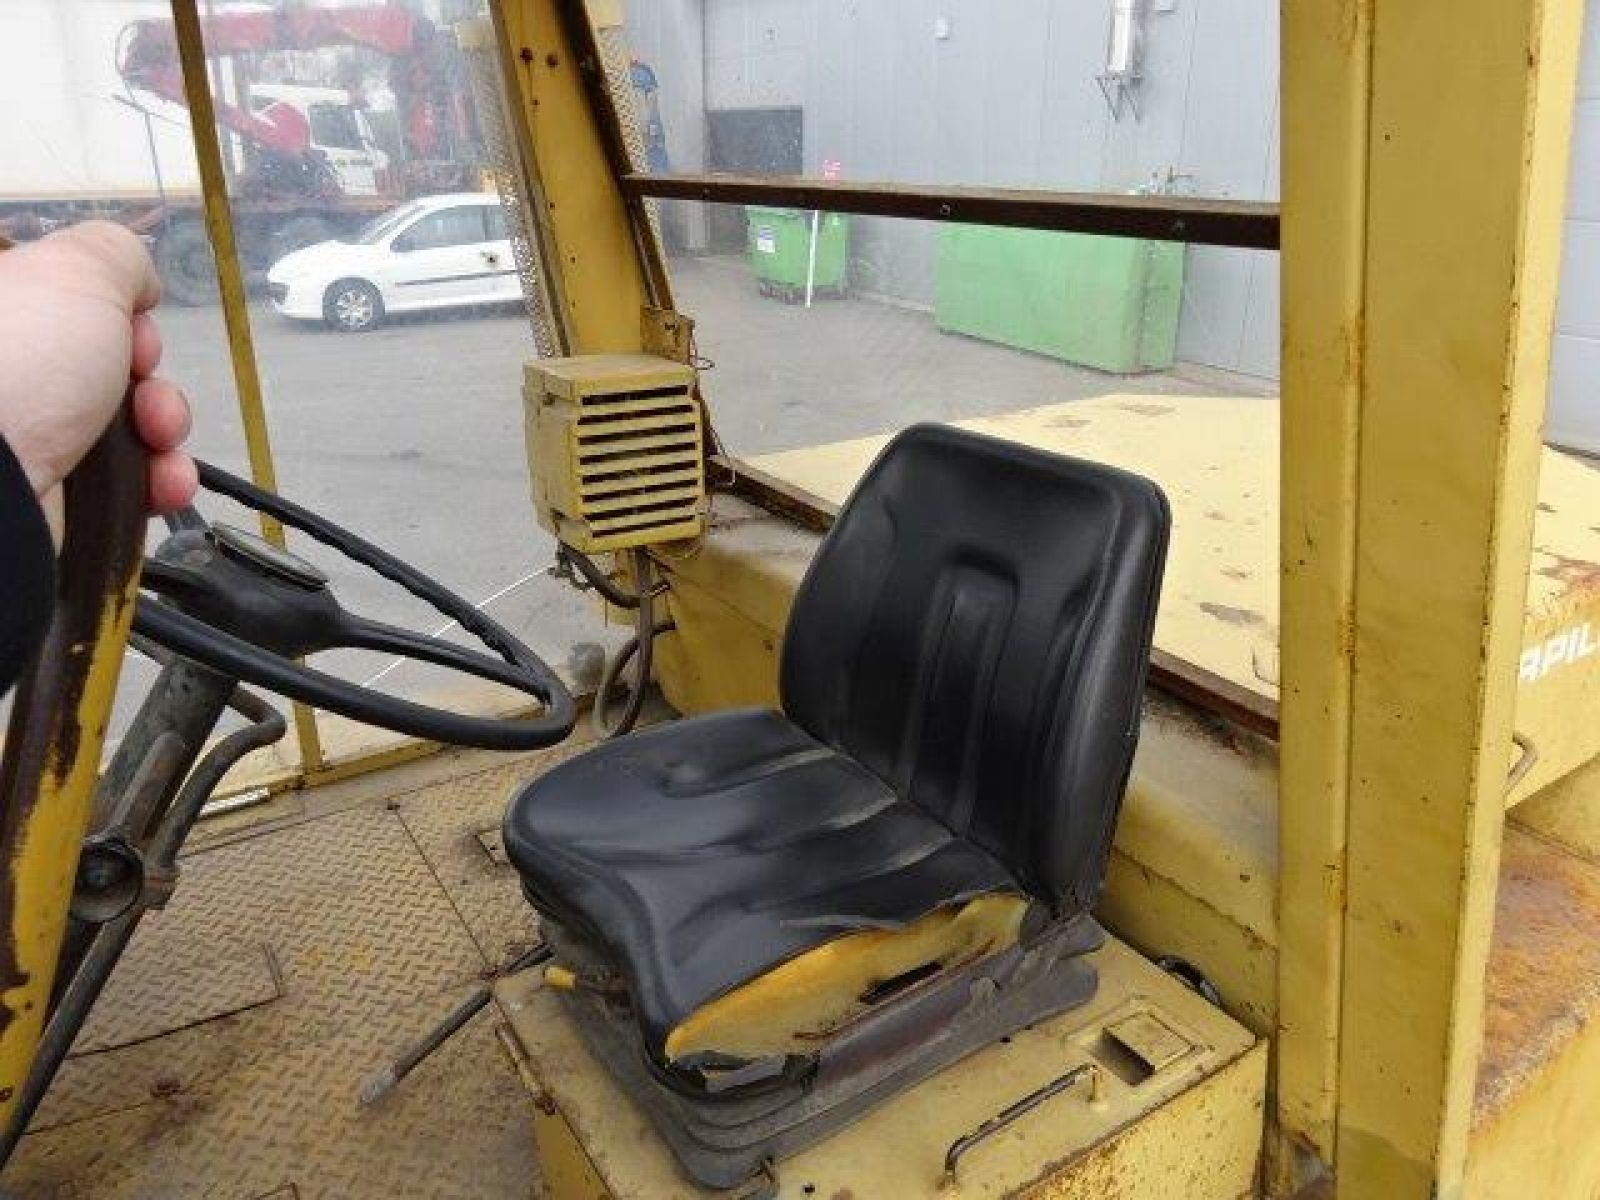 Vente occasion  Divers - CATERPILLAR V225  CHARIOT ELEVATEUR (Belgique - Europe) - Houffalize Trading s.a.